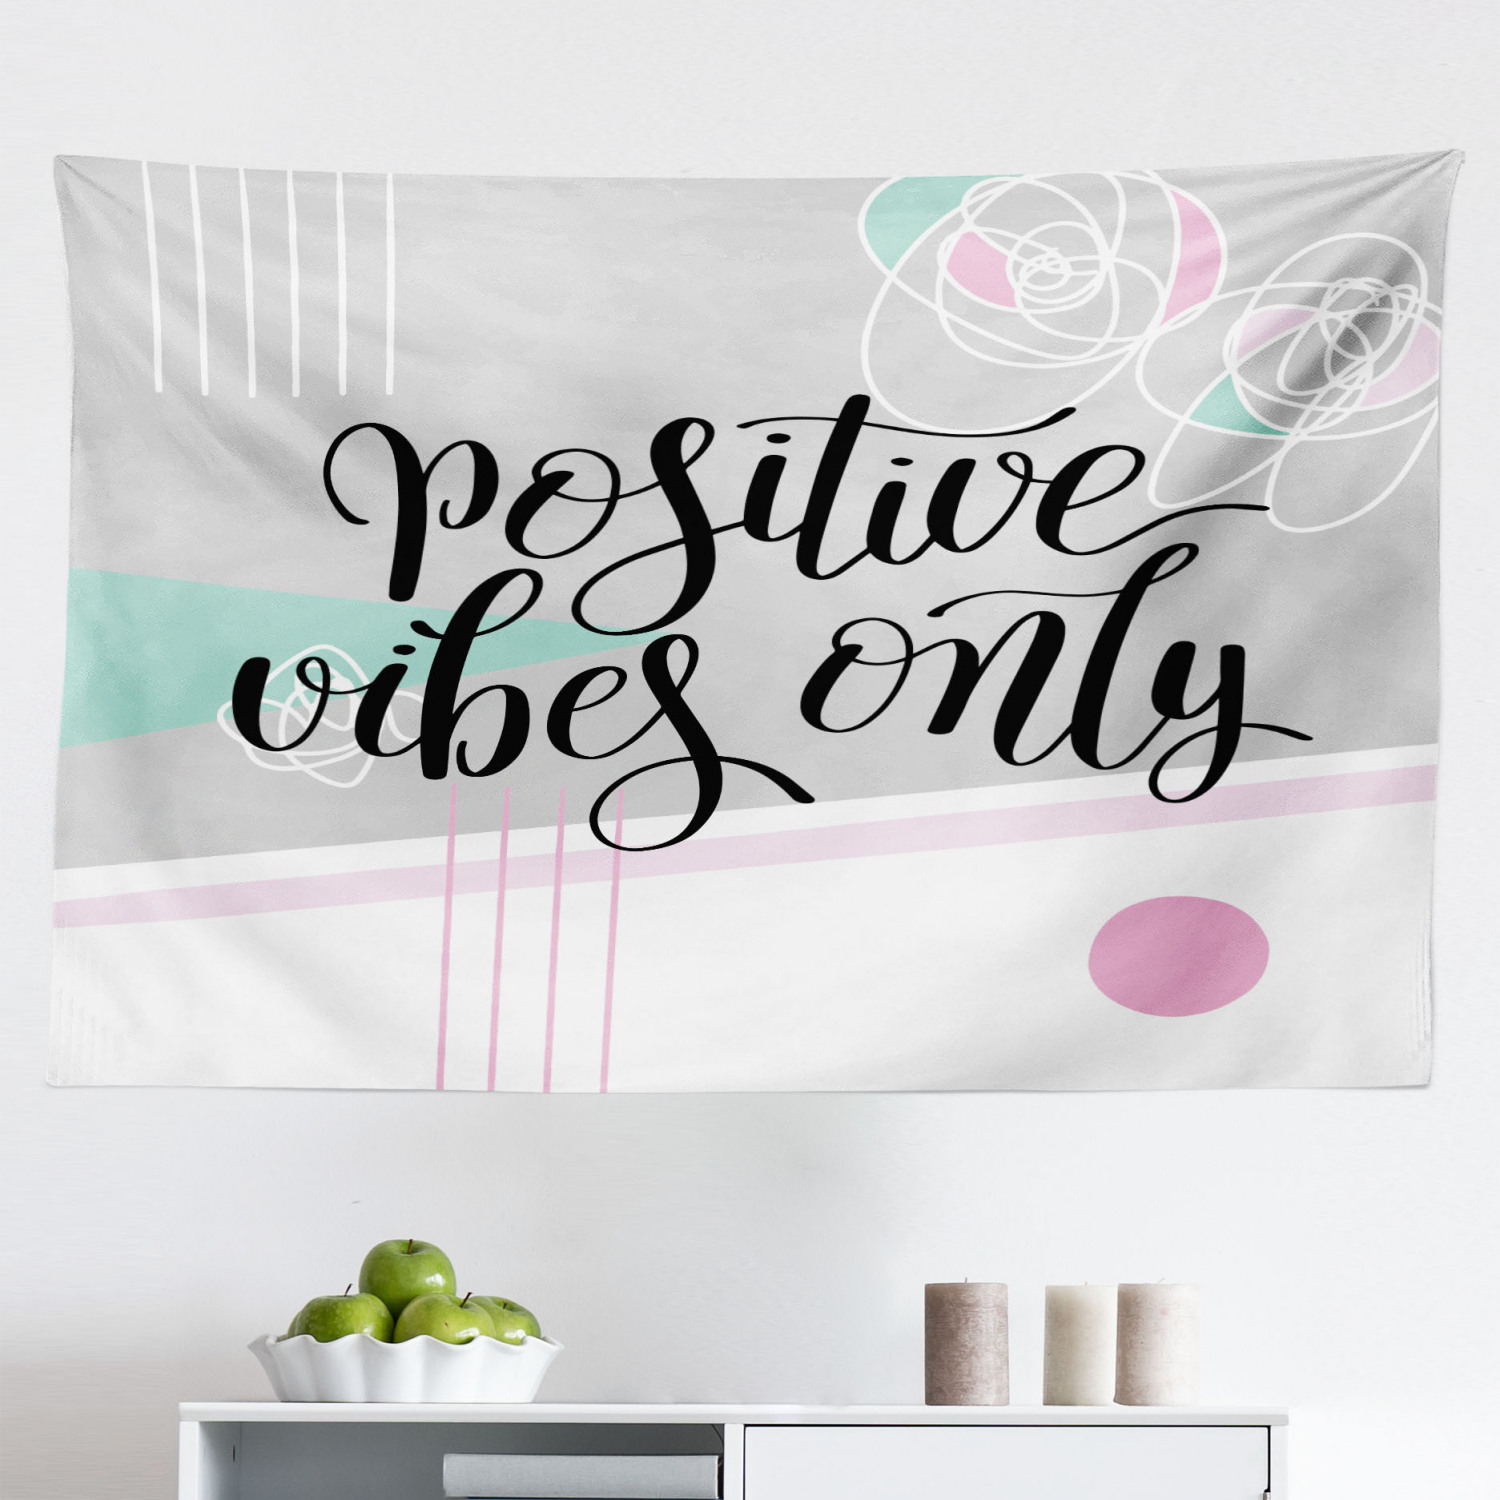 Ambesonne Positive Energy Tapestry, Cursive Lettering Words on Circular Pastel Tone Backdrop, Fabric Wall Hanging Decor for Bedroom Living Room Dorm, - 1